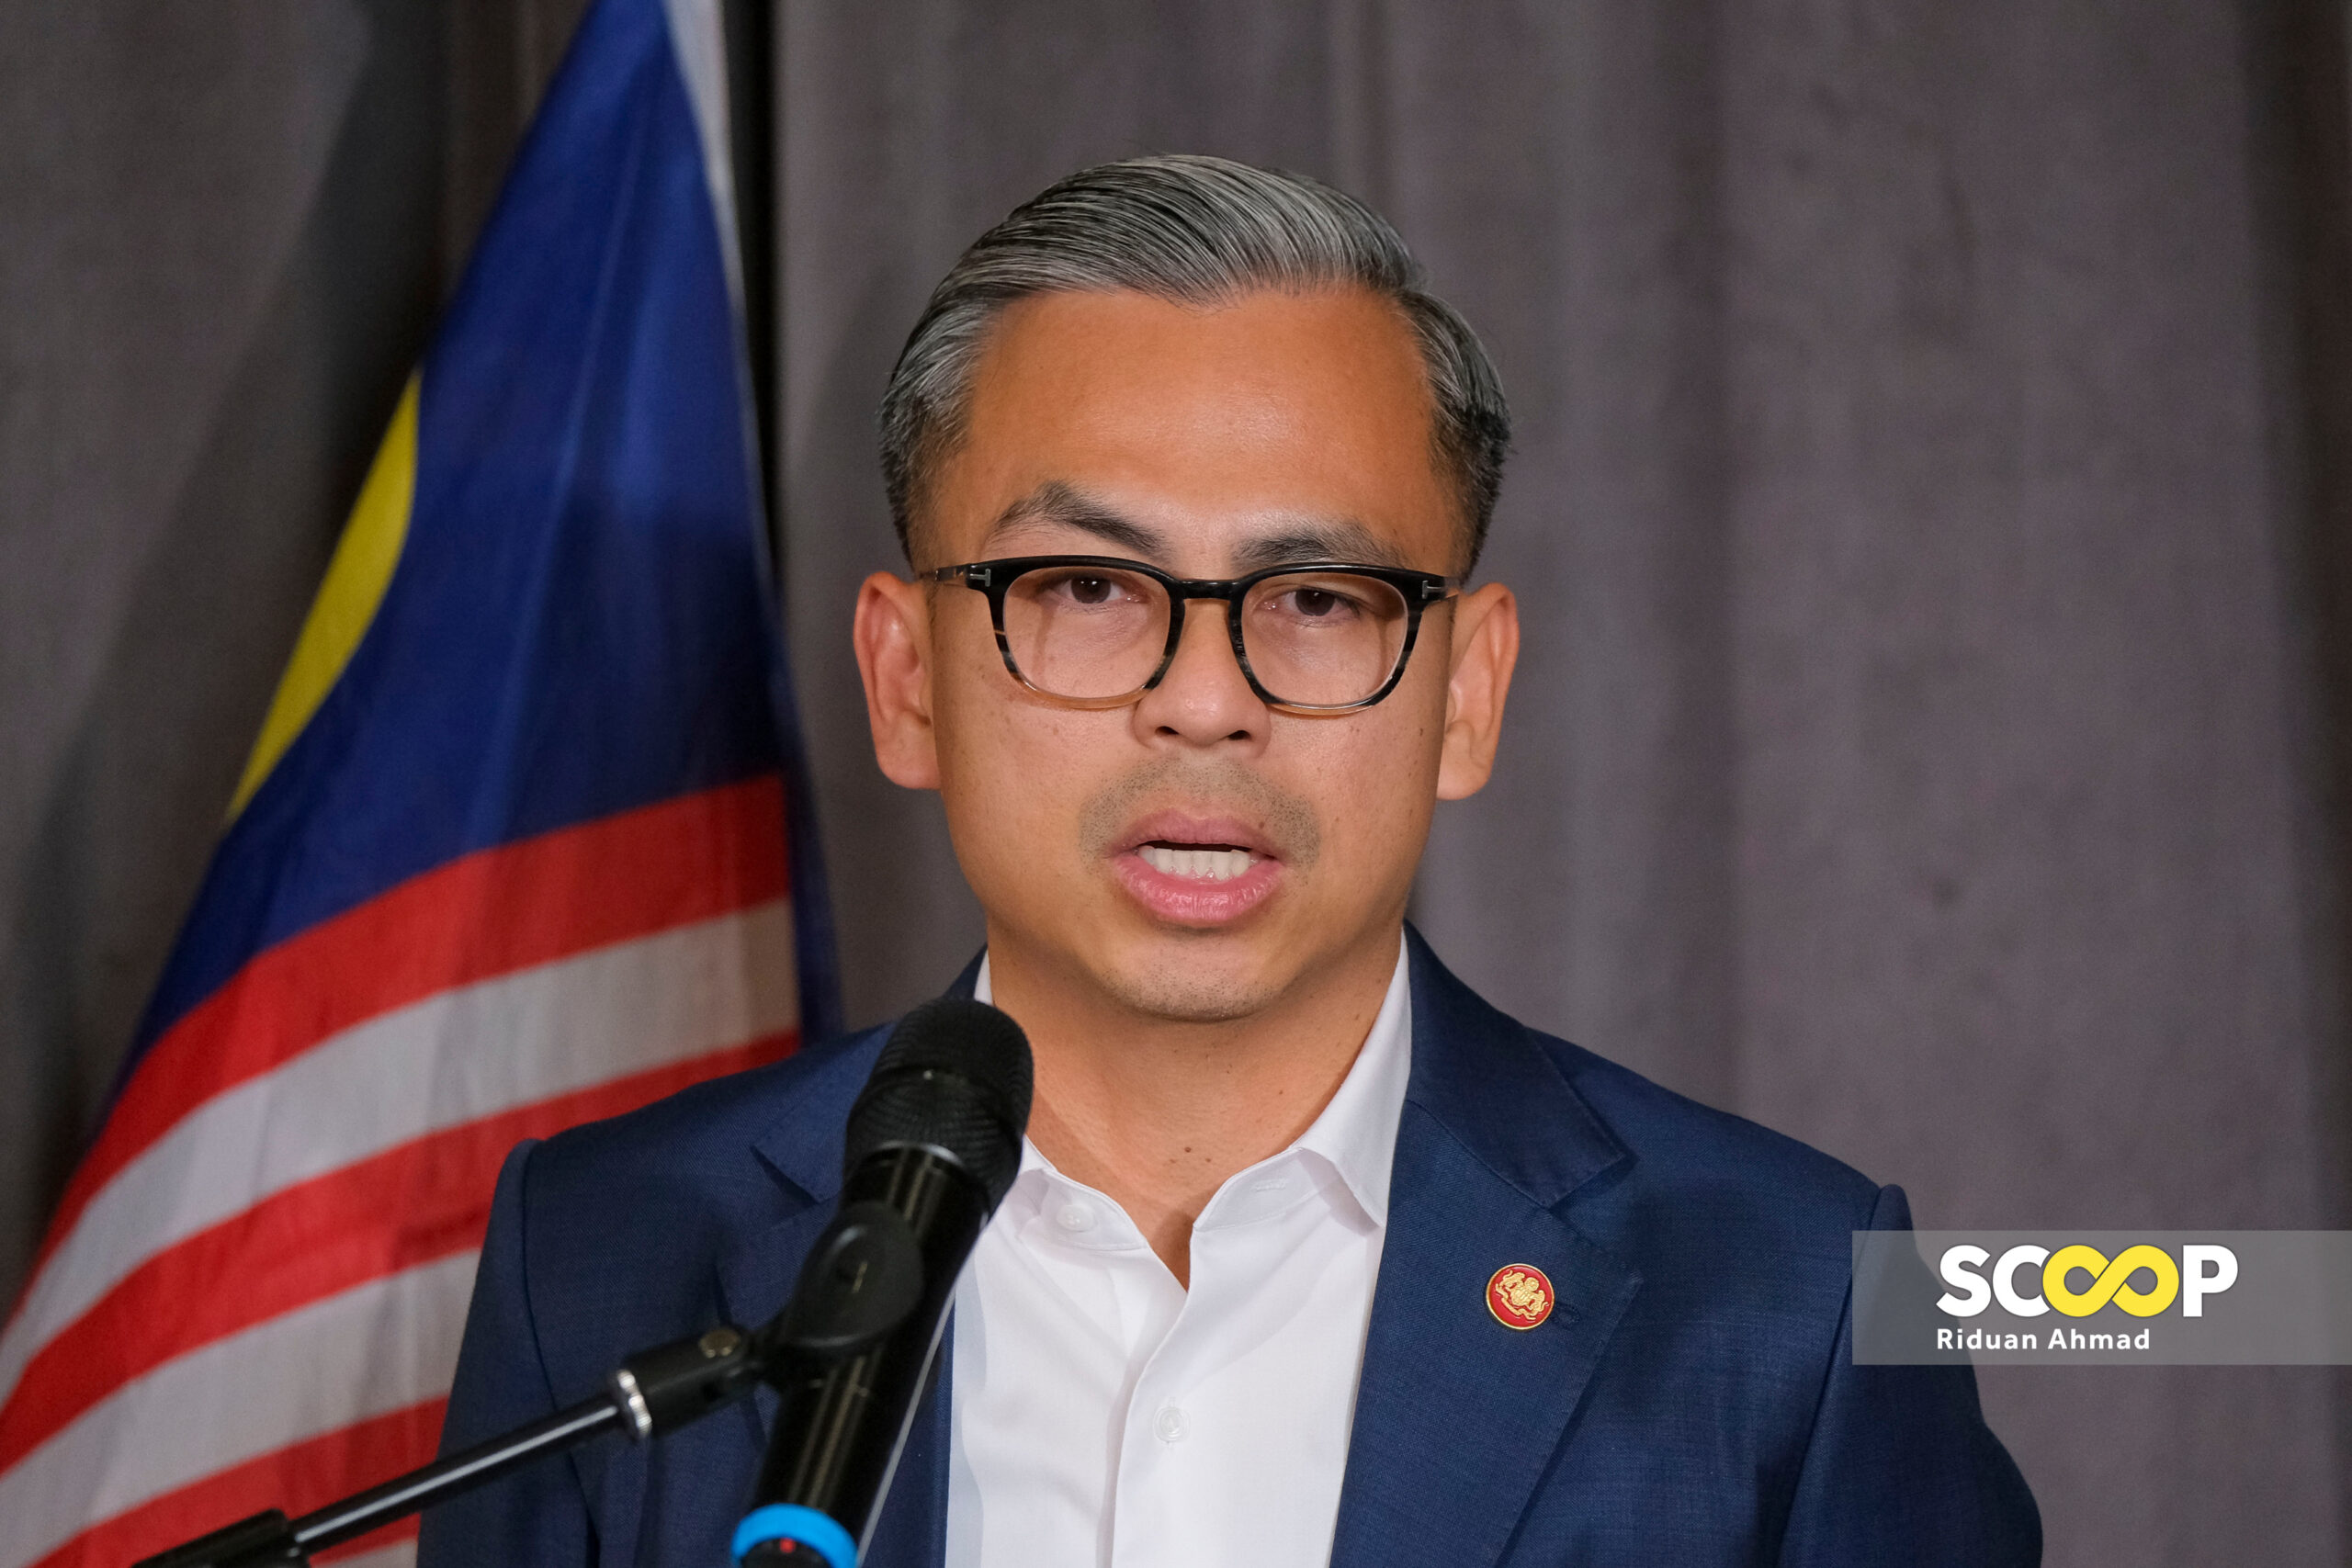 Malaysia's press freedom plummets: Fahmi acknowledges challenges, vows action